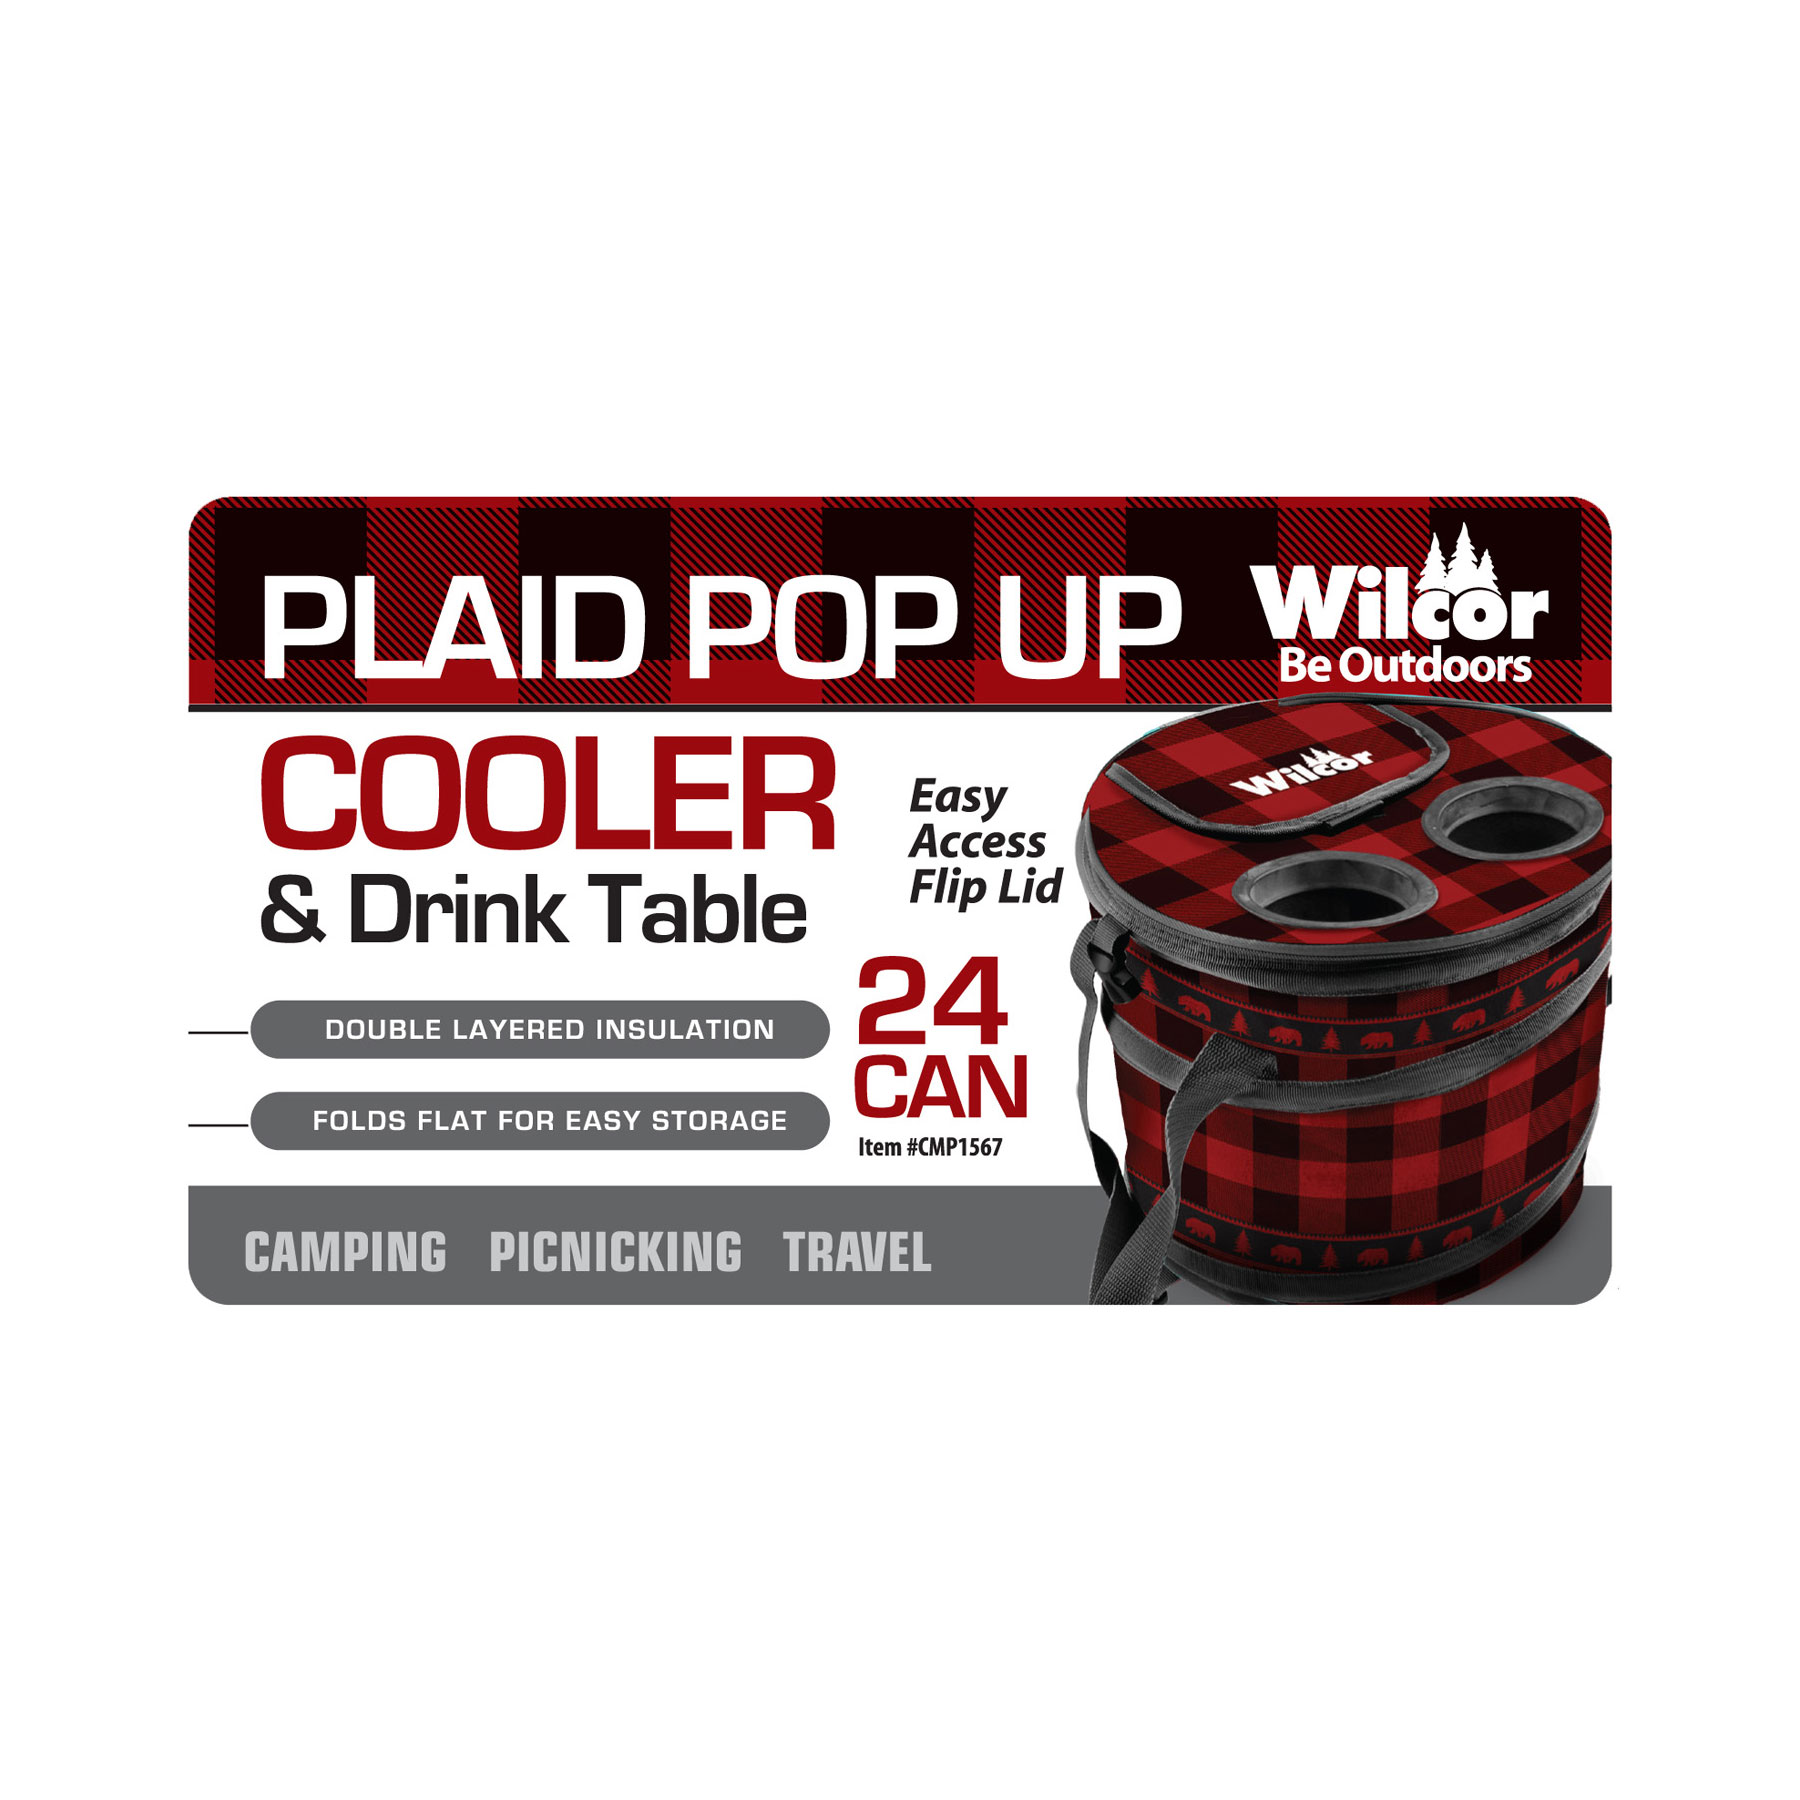 https://wilcor.net/productimages/cmp1567_buffalo_plaid_pop_up_cooler_tag_front.jpg